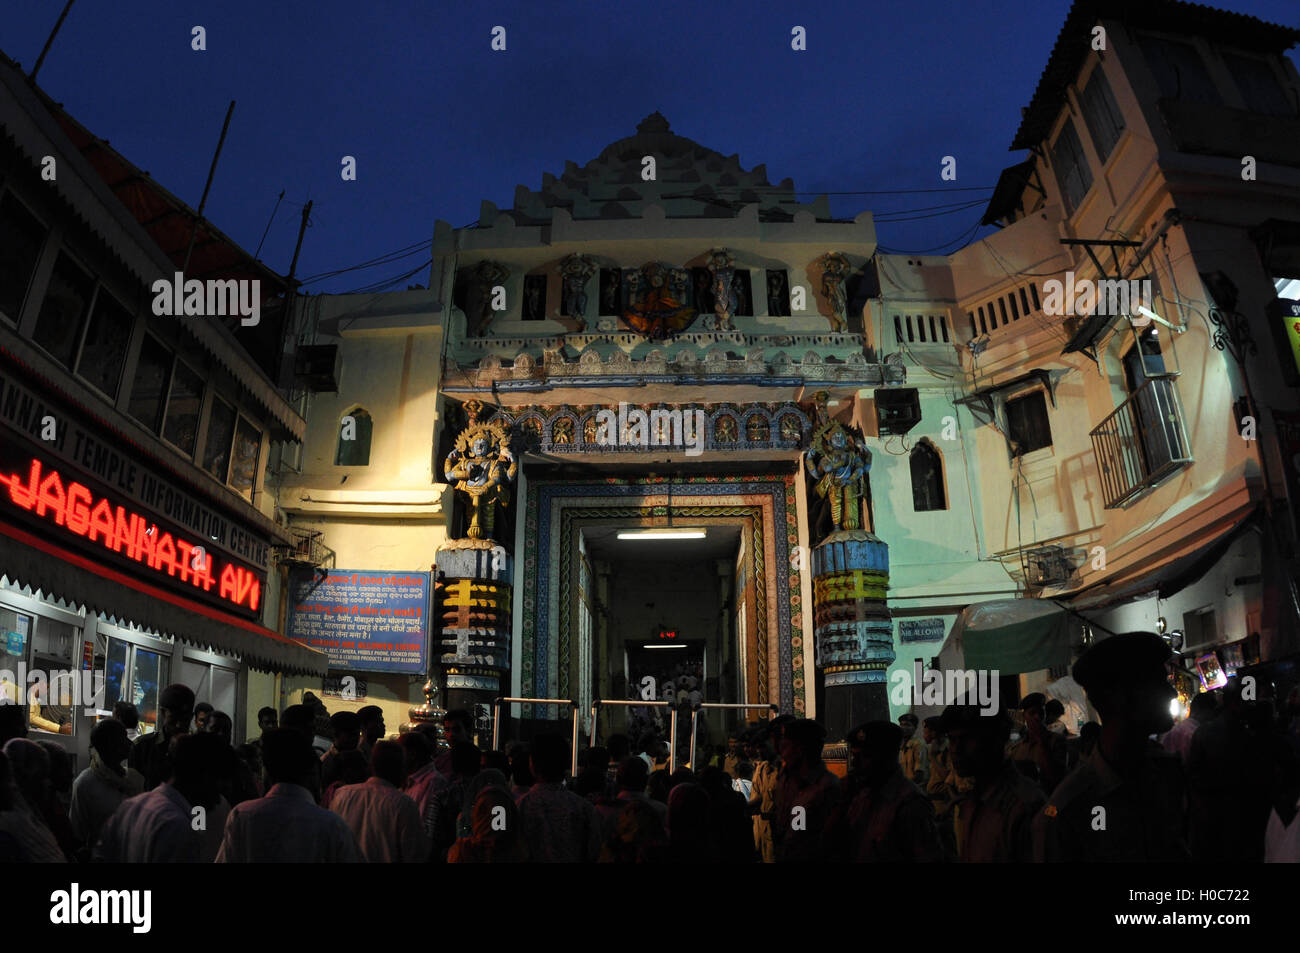 Puri, Odisha, India-July 2, 2011: Lion’s Gate in front of the Jagannath Temple, decorated and dimly lit, for Rath Yatra Festival Stock Photo